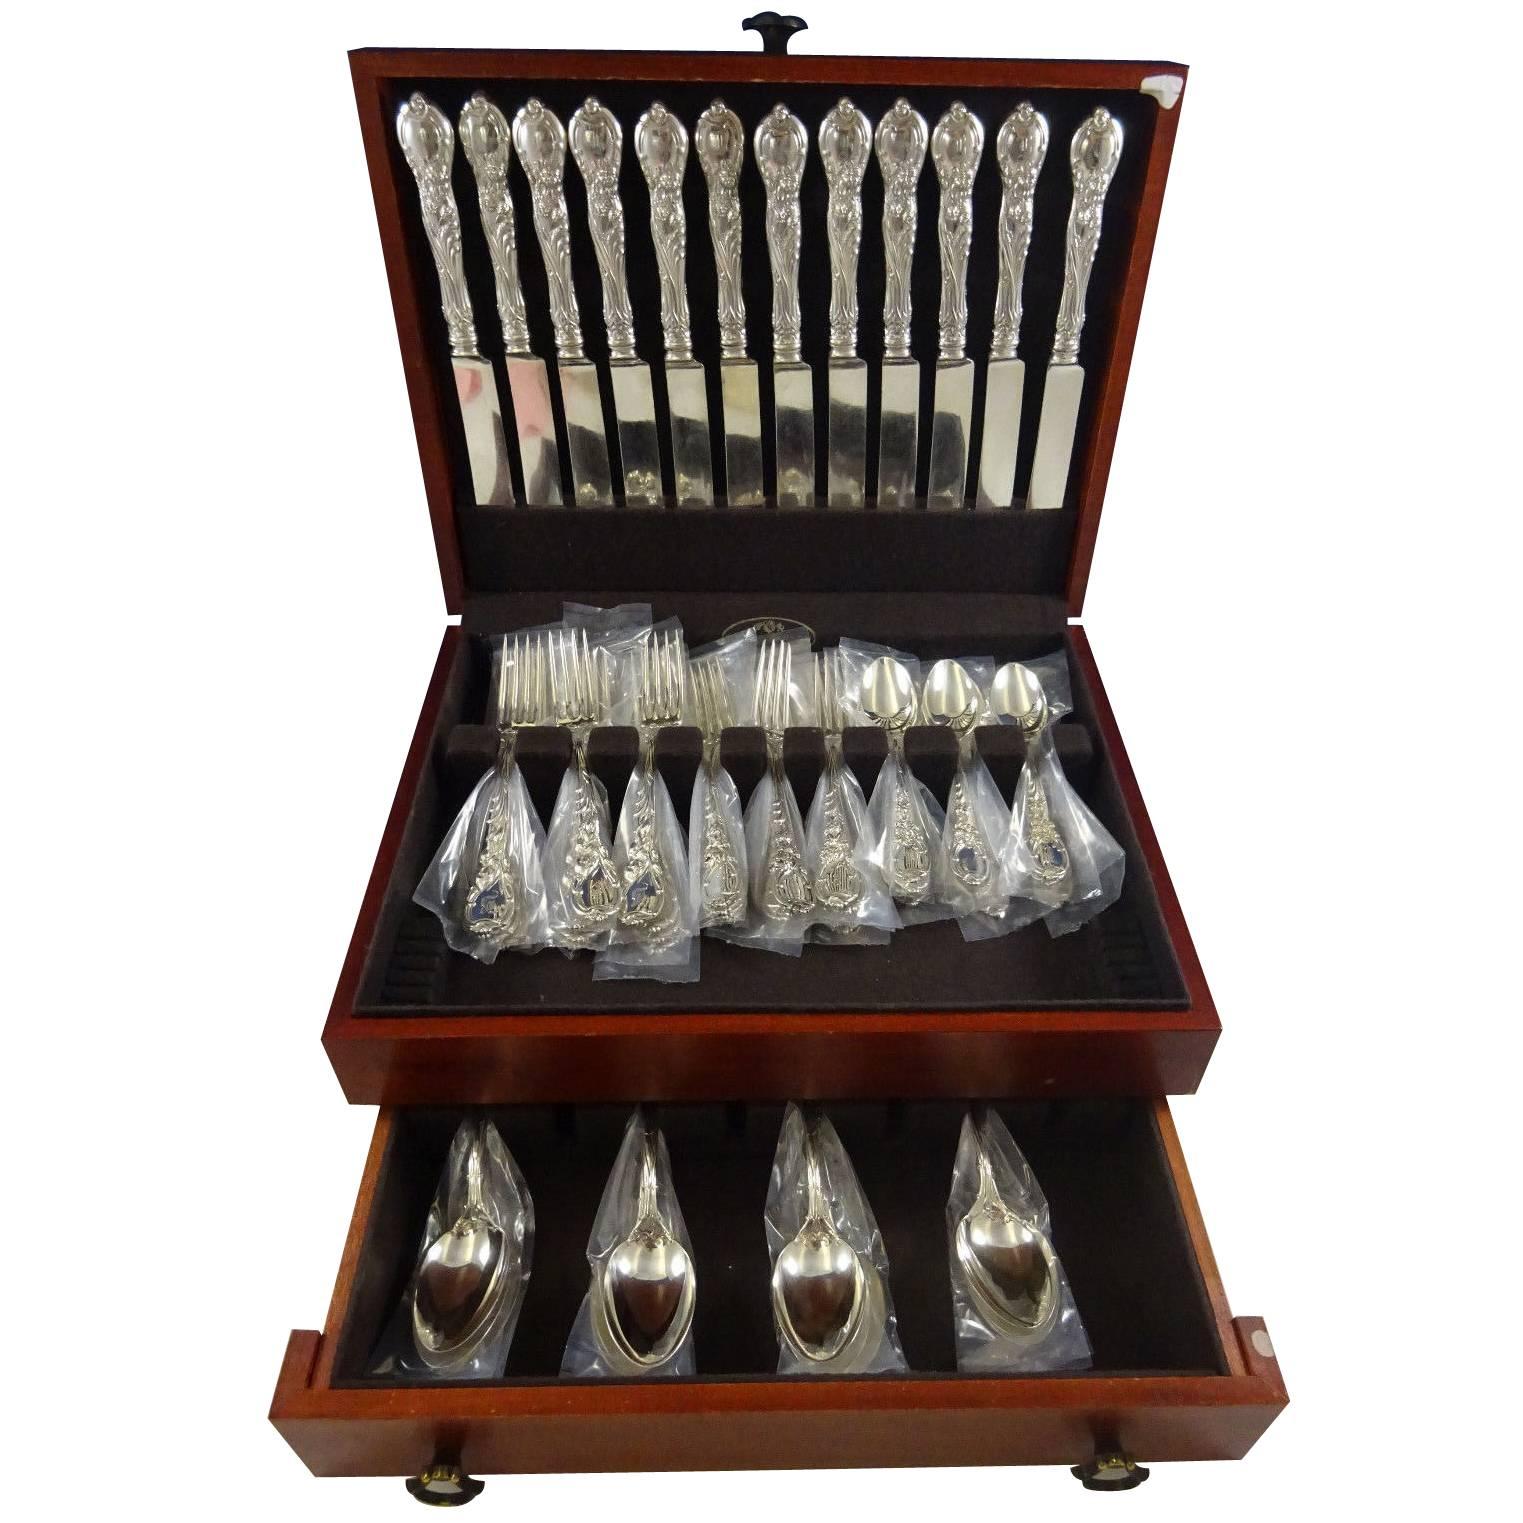 La Parisienne by Reed and Barton sterling silver dinner size flatware set of 60 pieces. This stunning Art Nouveau, multi-motif, floral pattern was introduced in the year 1902. This set includes:

12 banquet size knives, 10 1/4